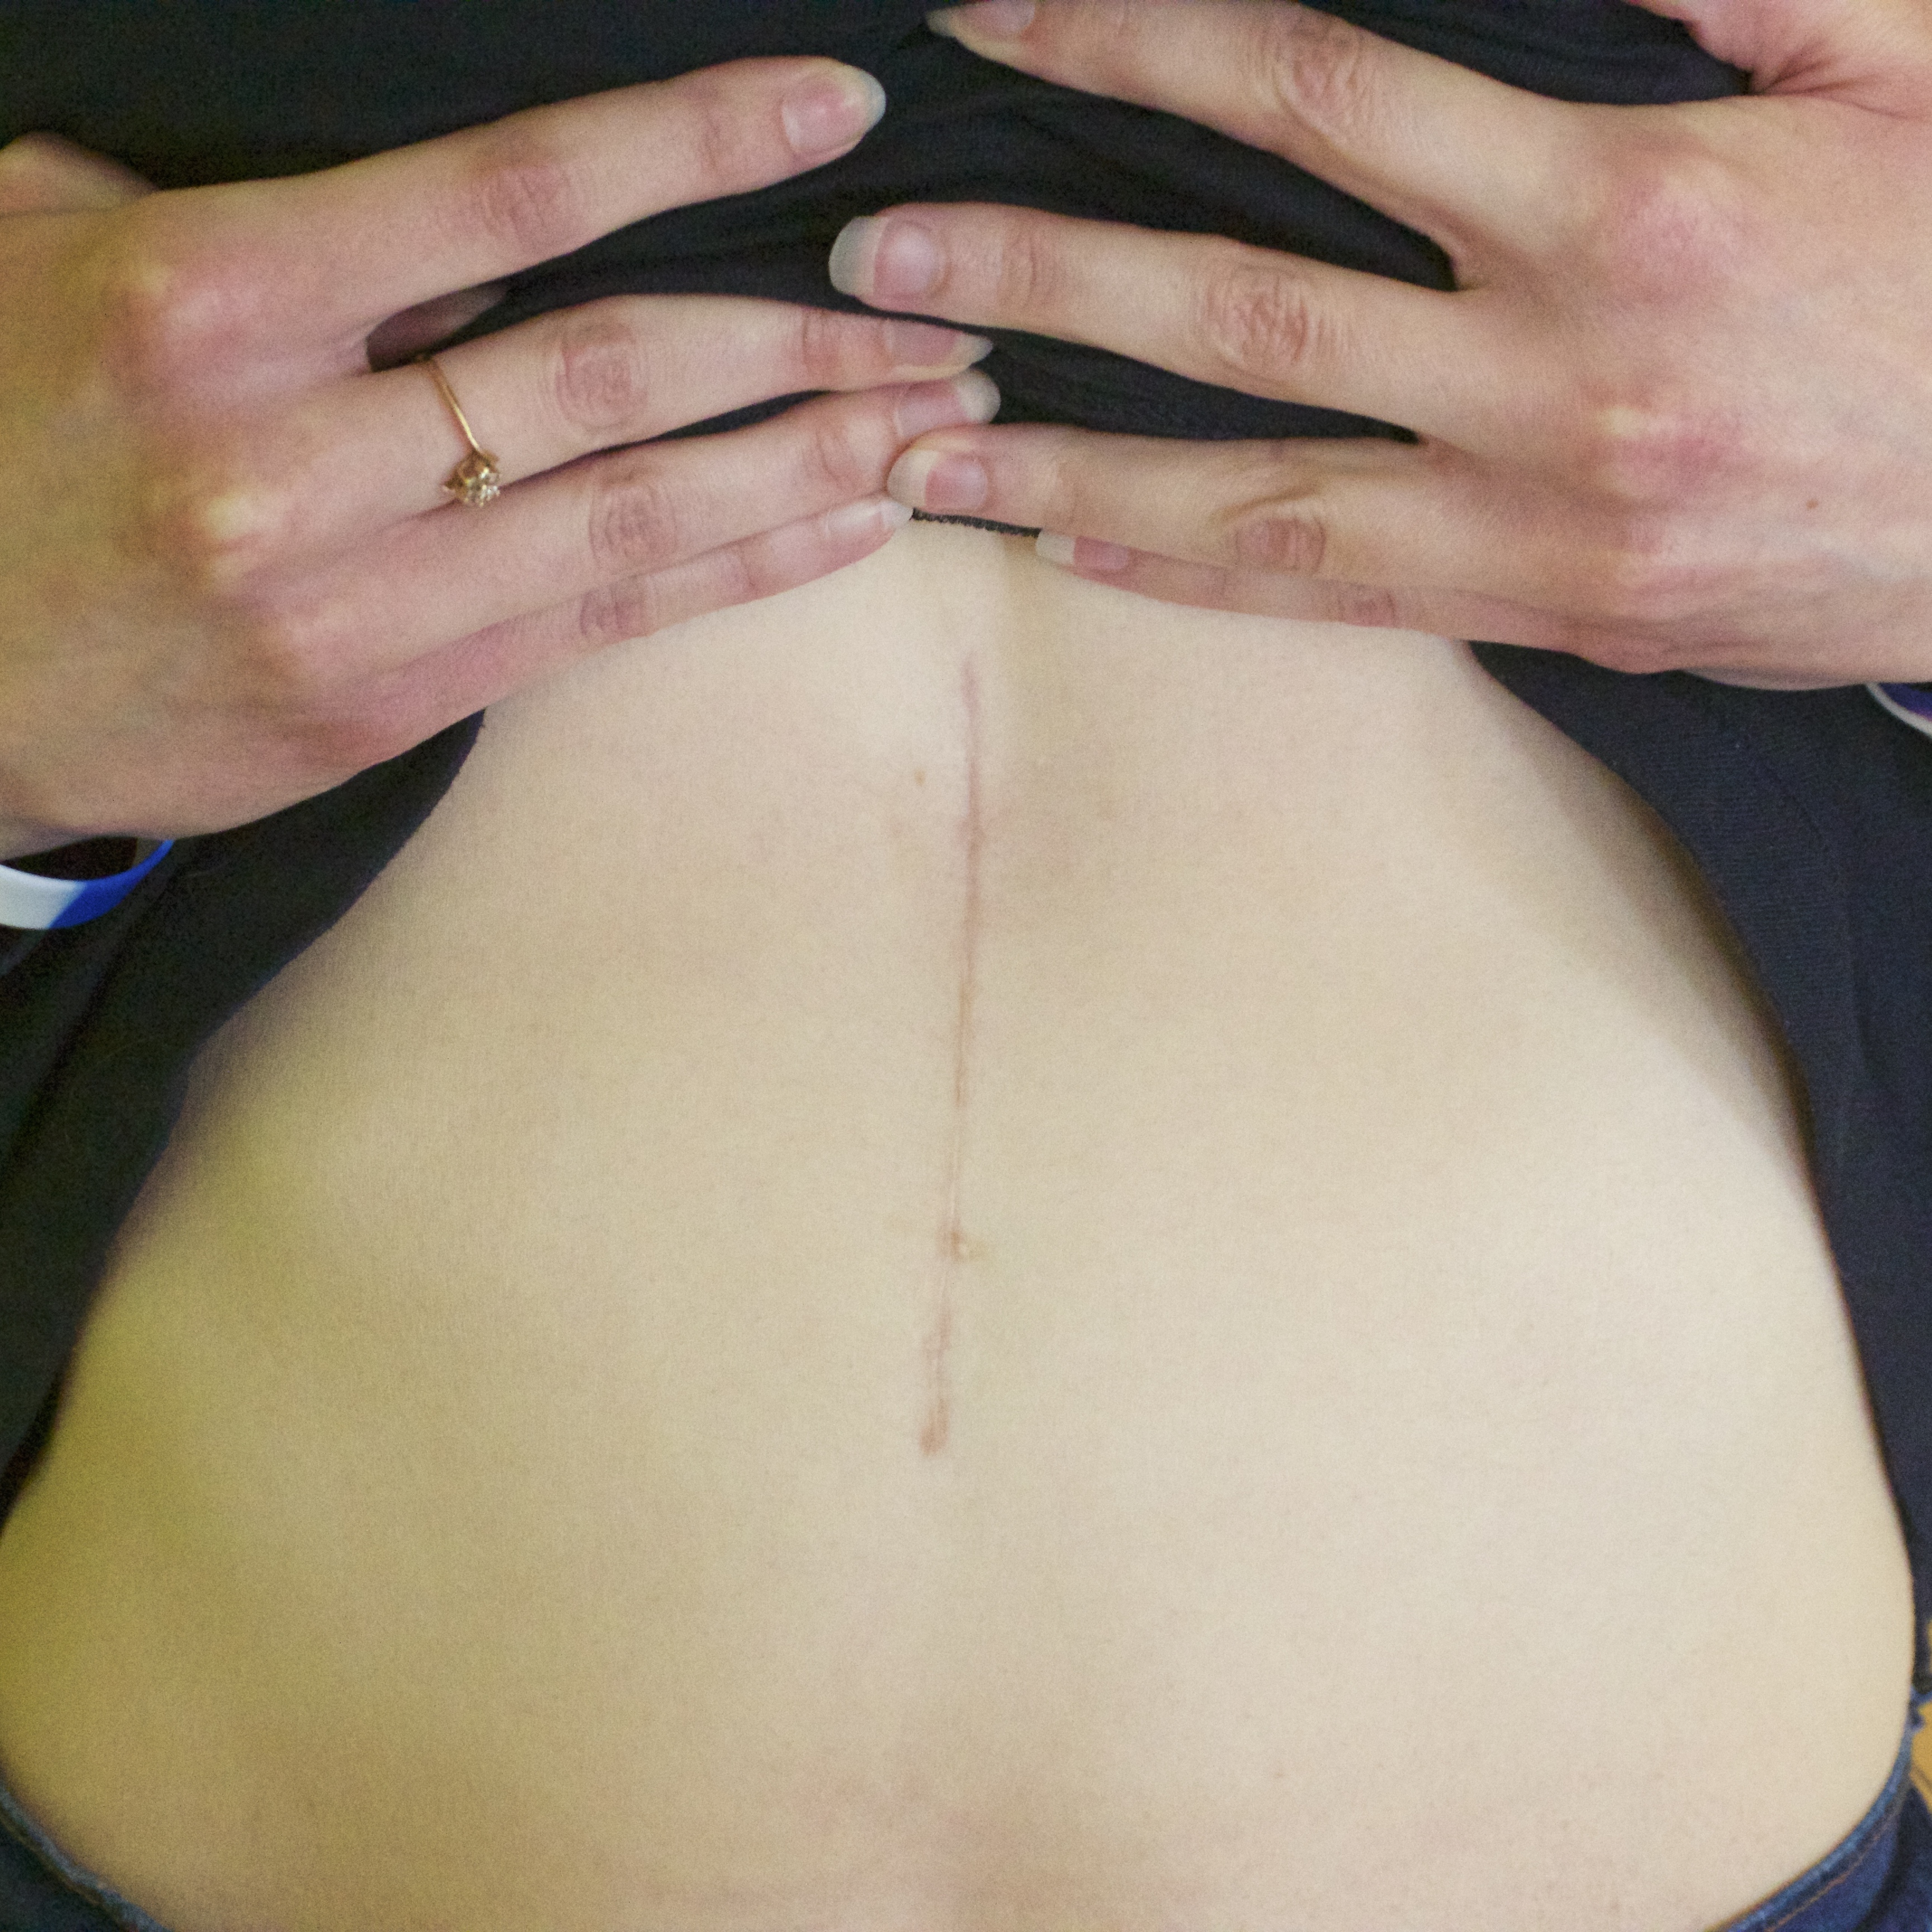 woman holding up shirt to show scar on stomach